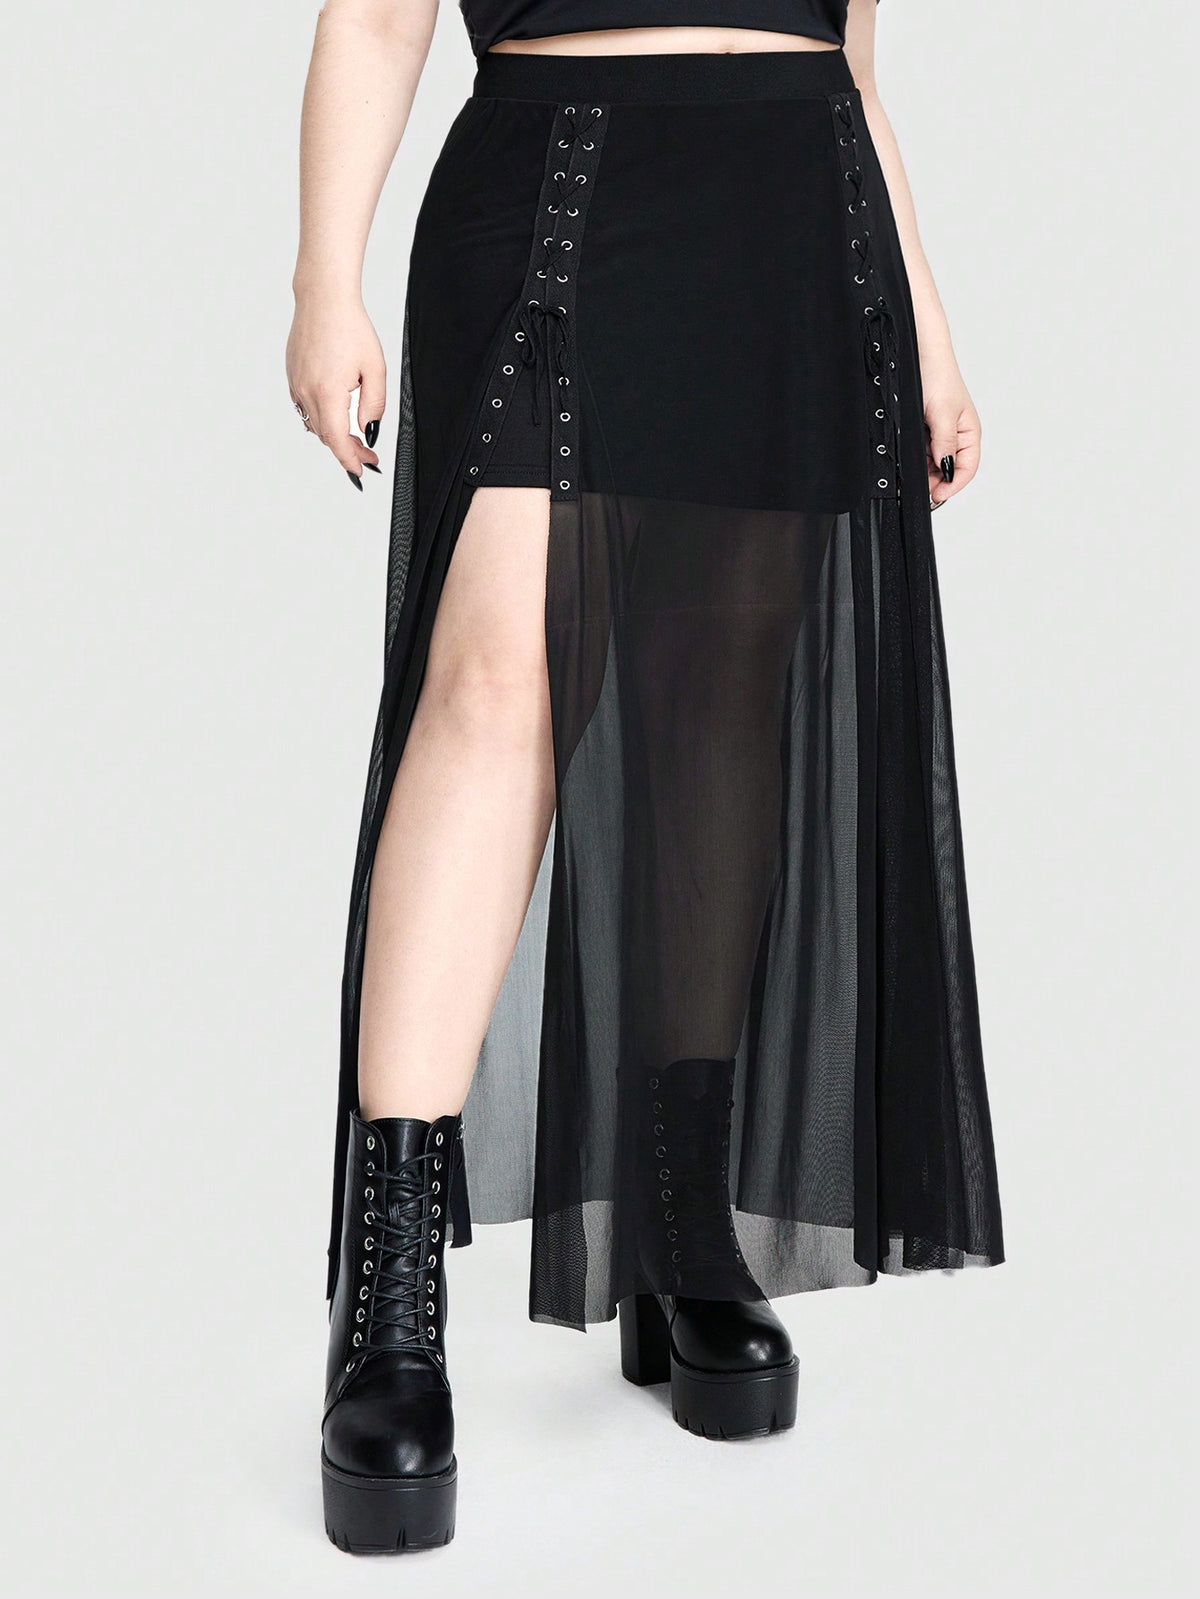 ROMWE Goth Plus Size Gothic Metal-Chain Strap High-Slit Sheer Mesh A-Line Skirt For Women